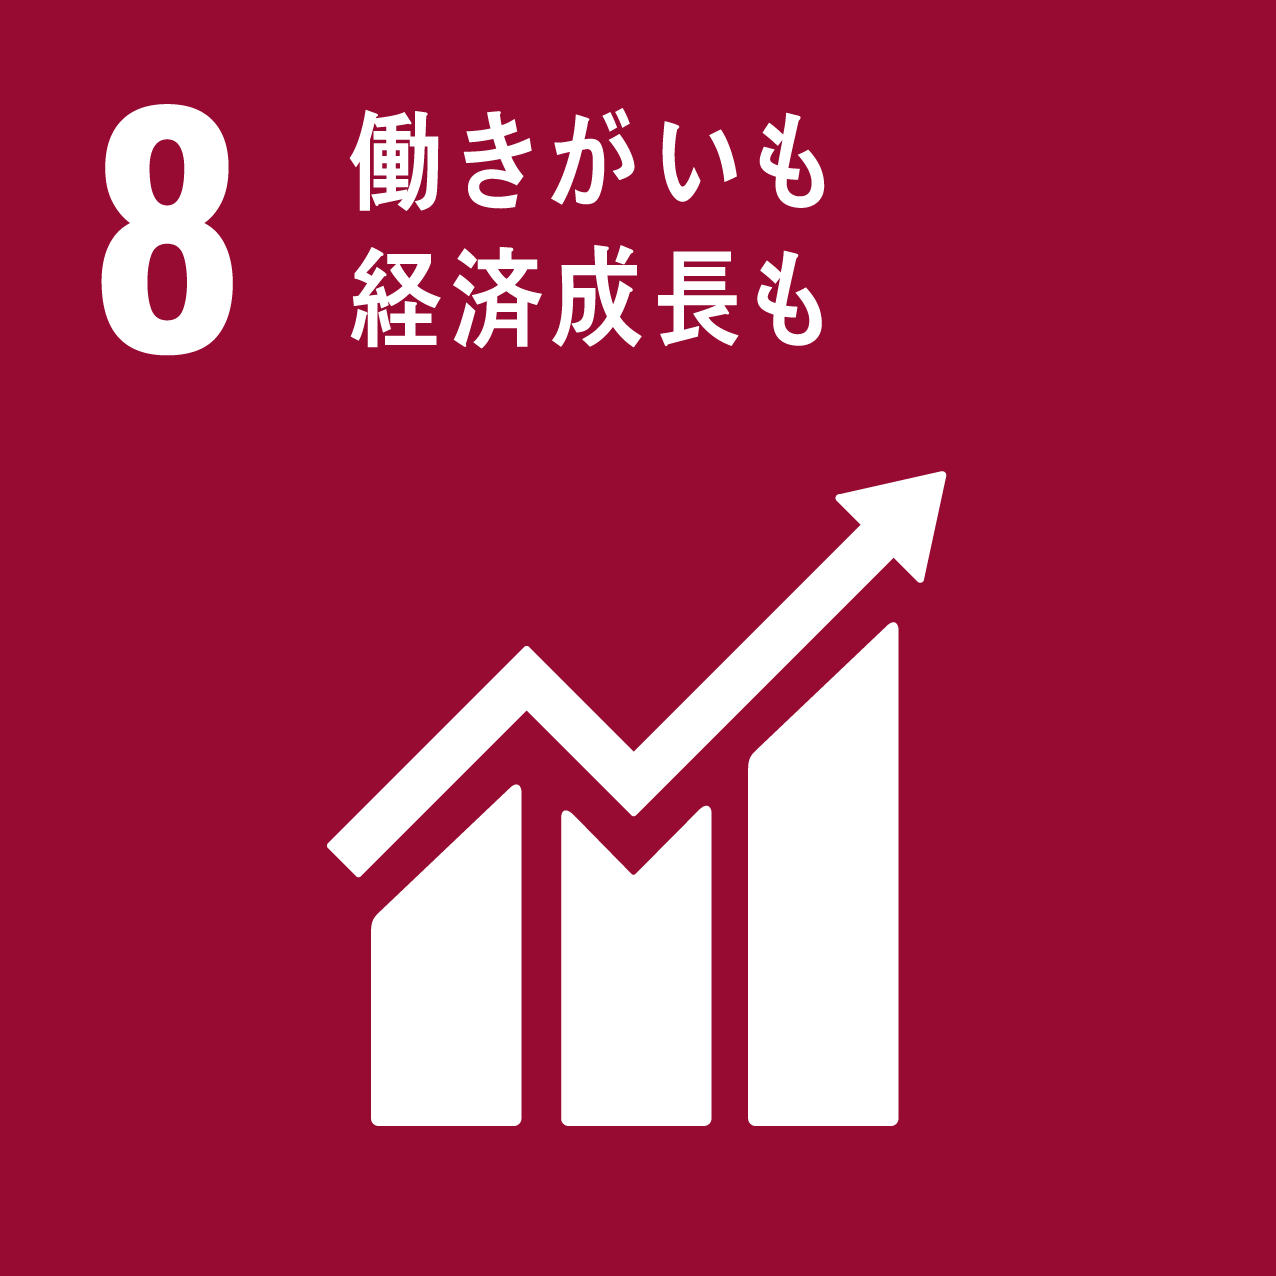 https://ambienthome.com/knowledge/images/sdg_icon_08_ja_2.png